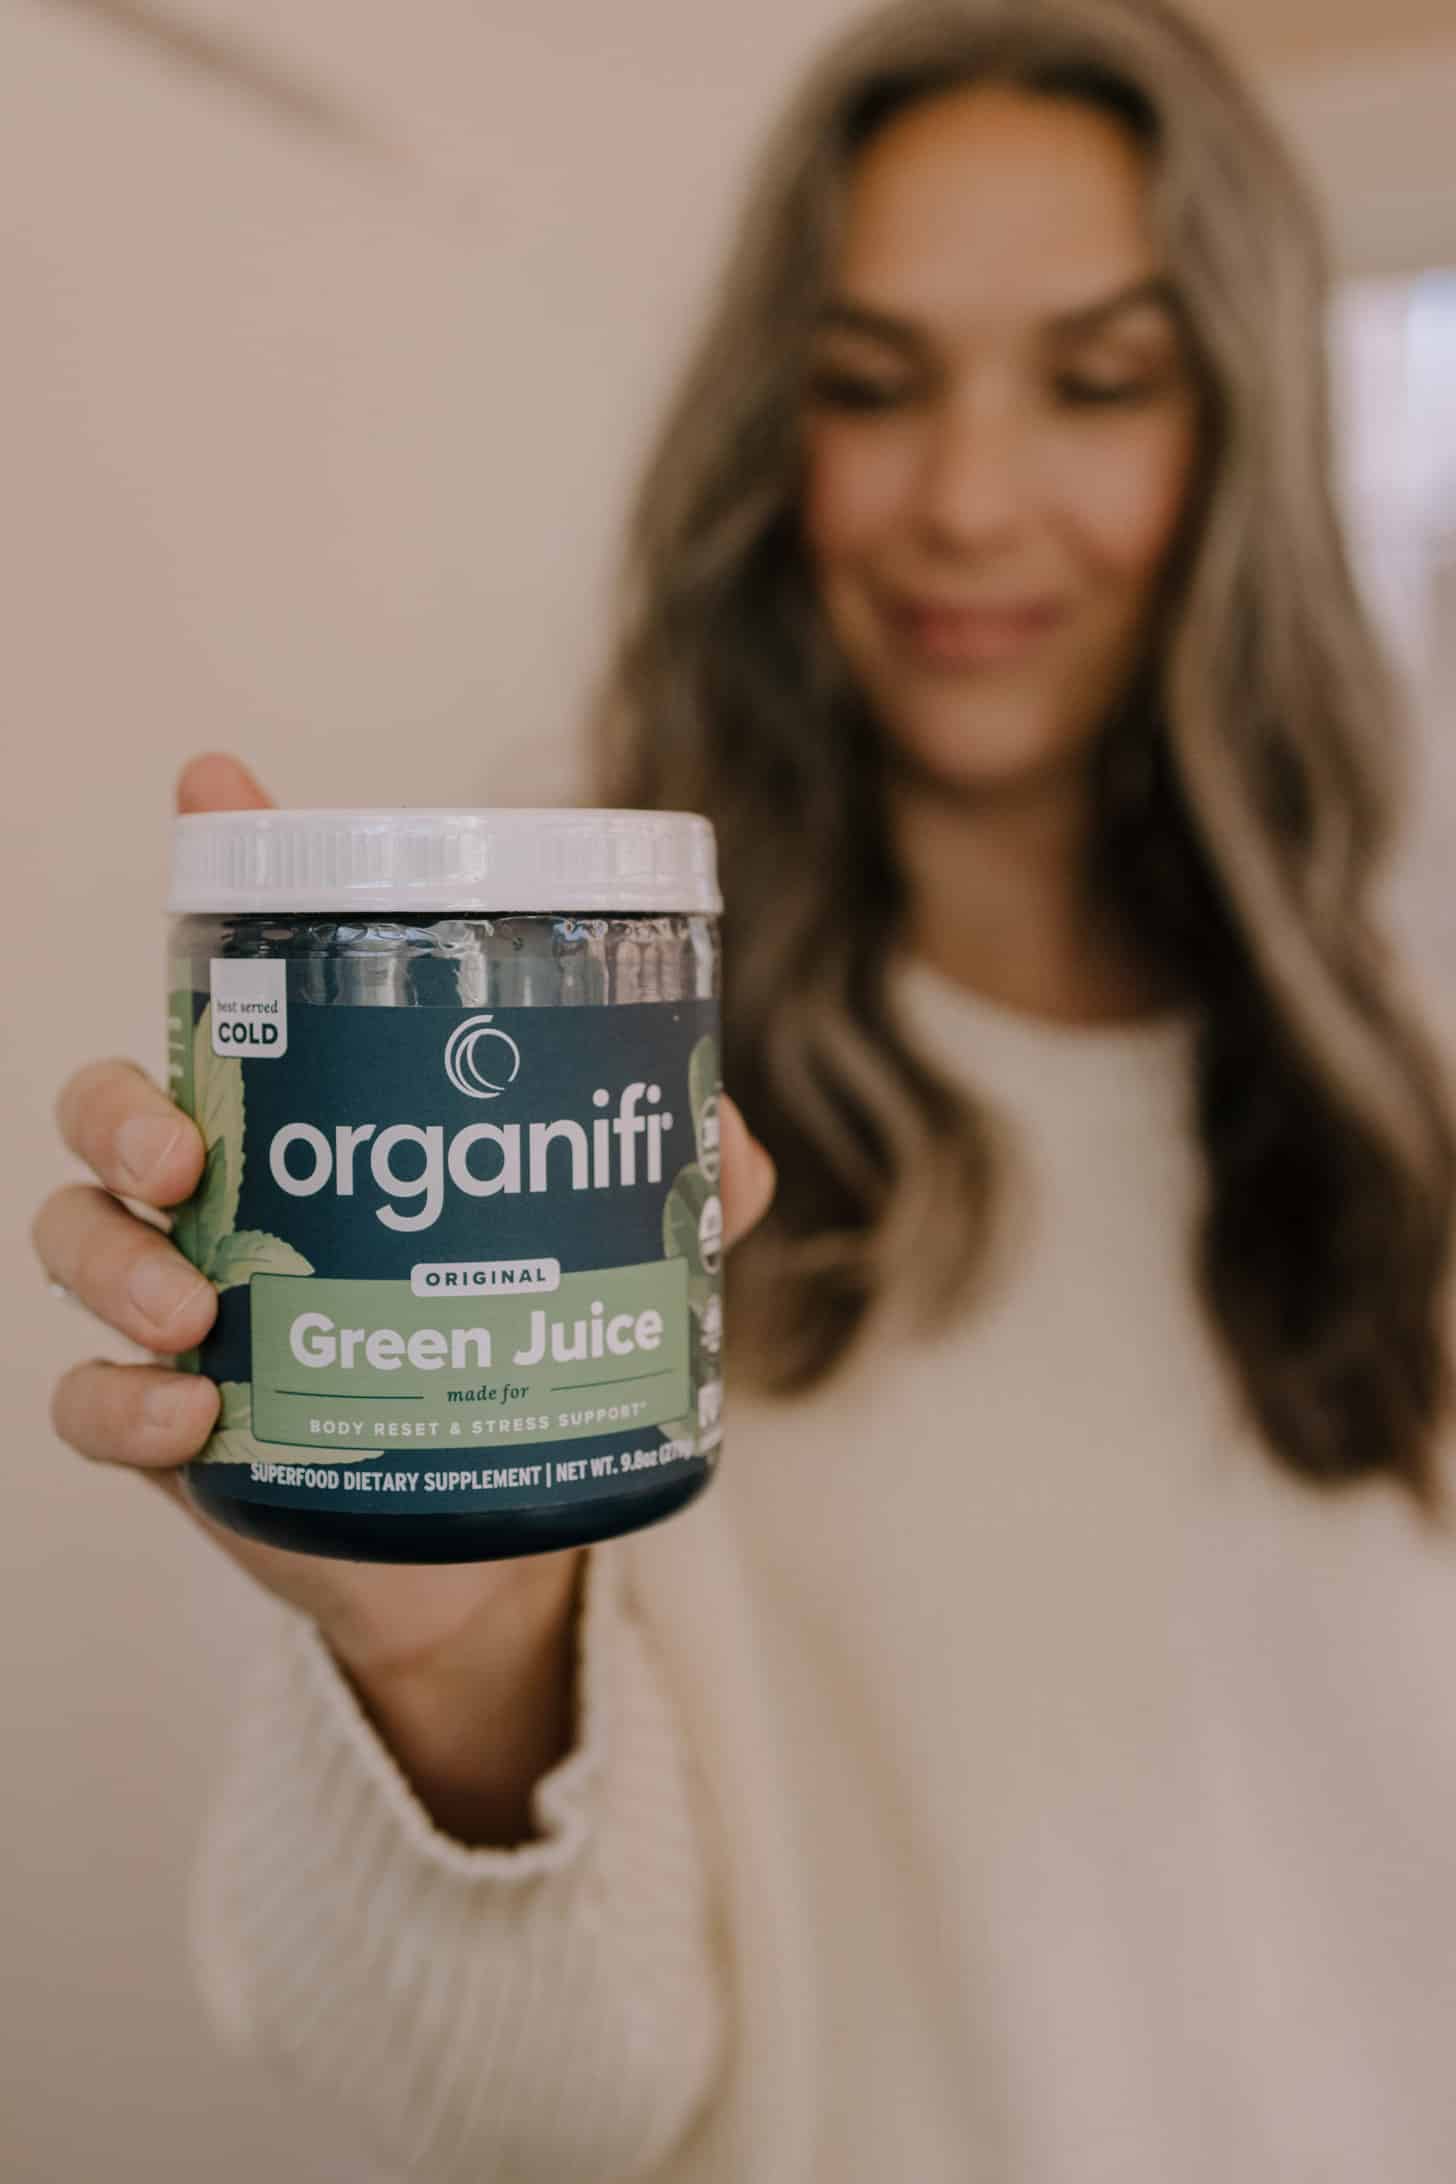 What Does Organifi Green Juice - Superfood Supplements Mean?